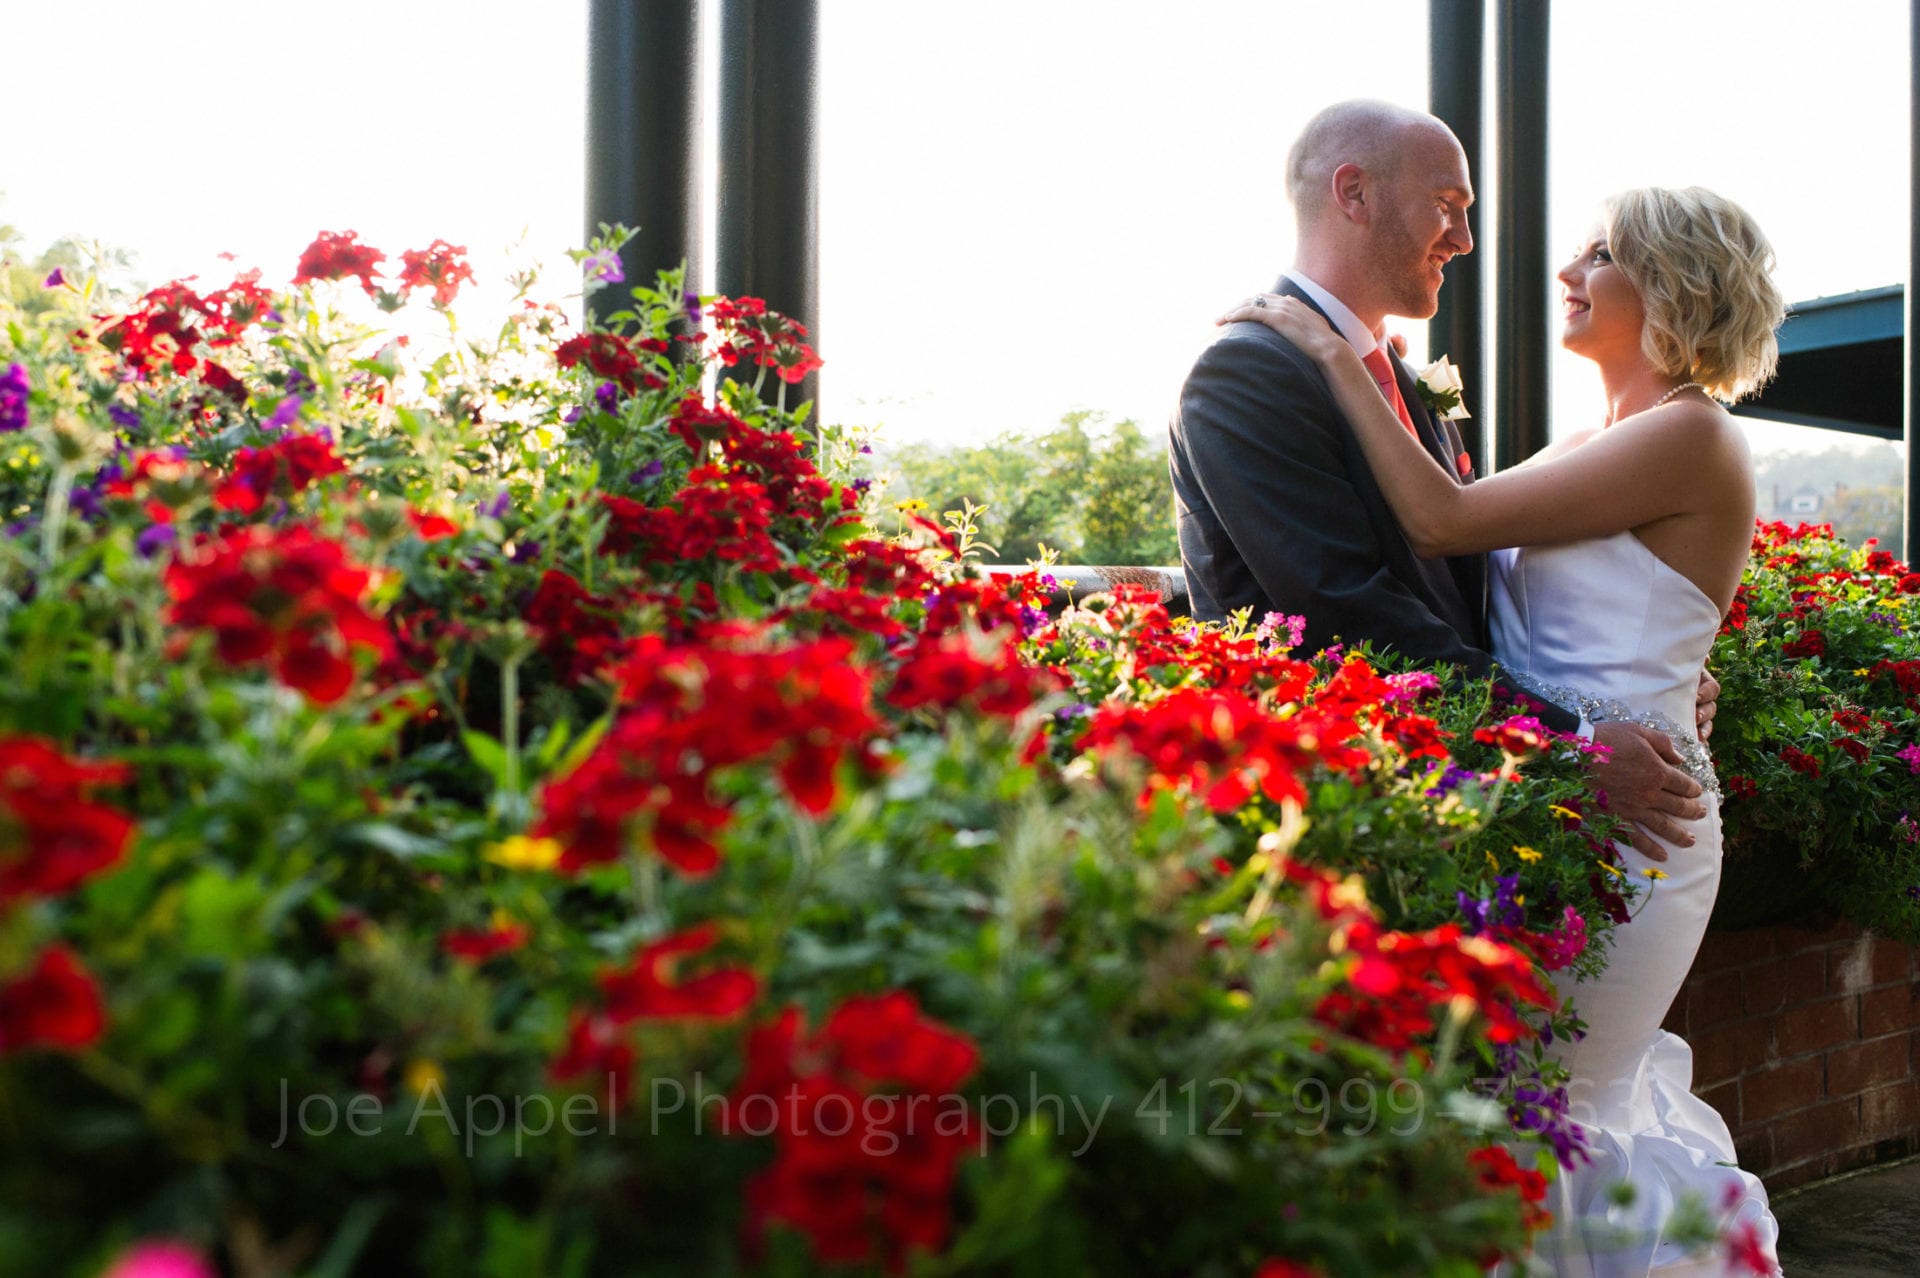 A couple stands at the right side of the frame behind a planter filled with red flowers at the entrance to the Pittsburgh Zoo and PPG Aquarium.